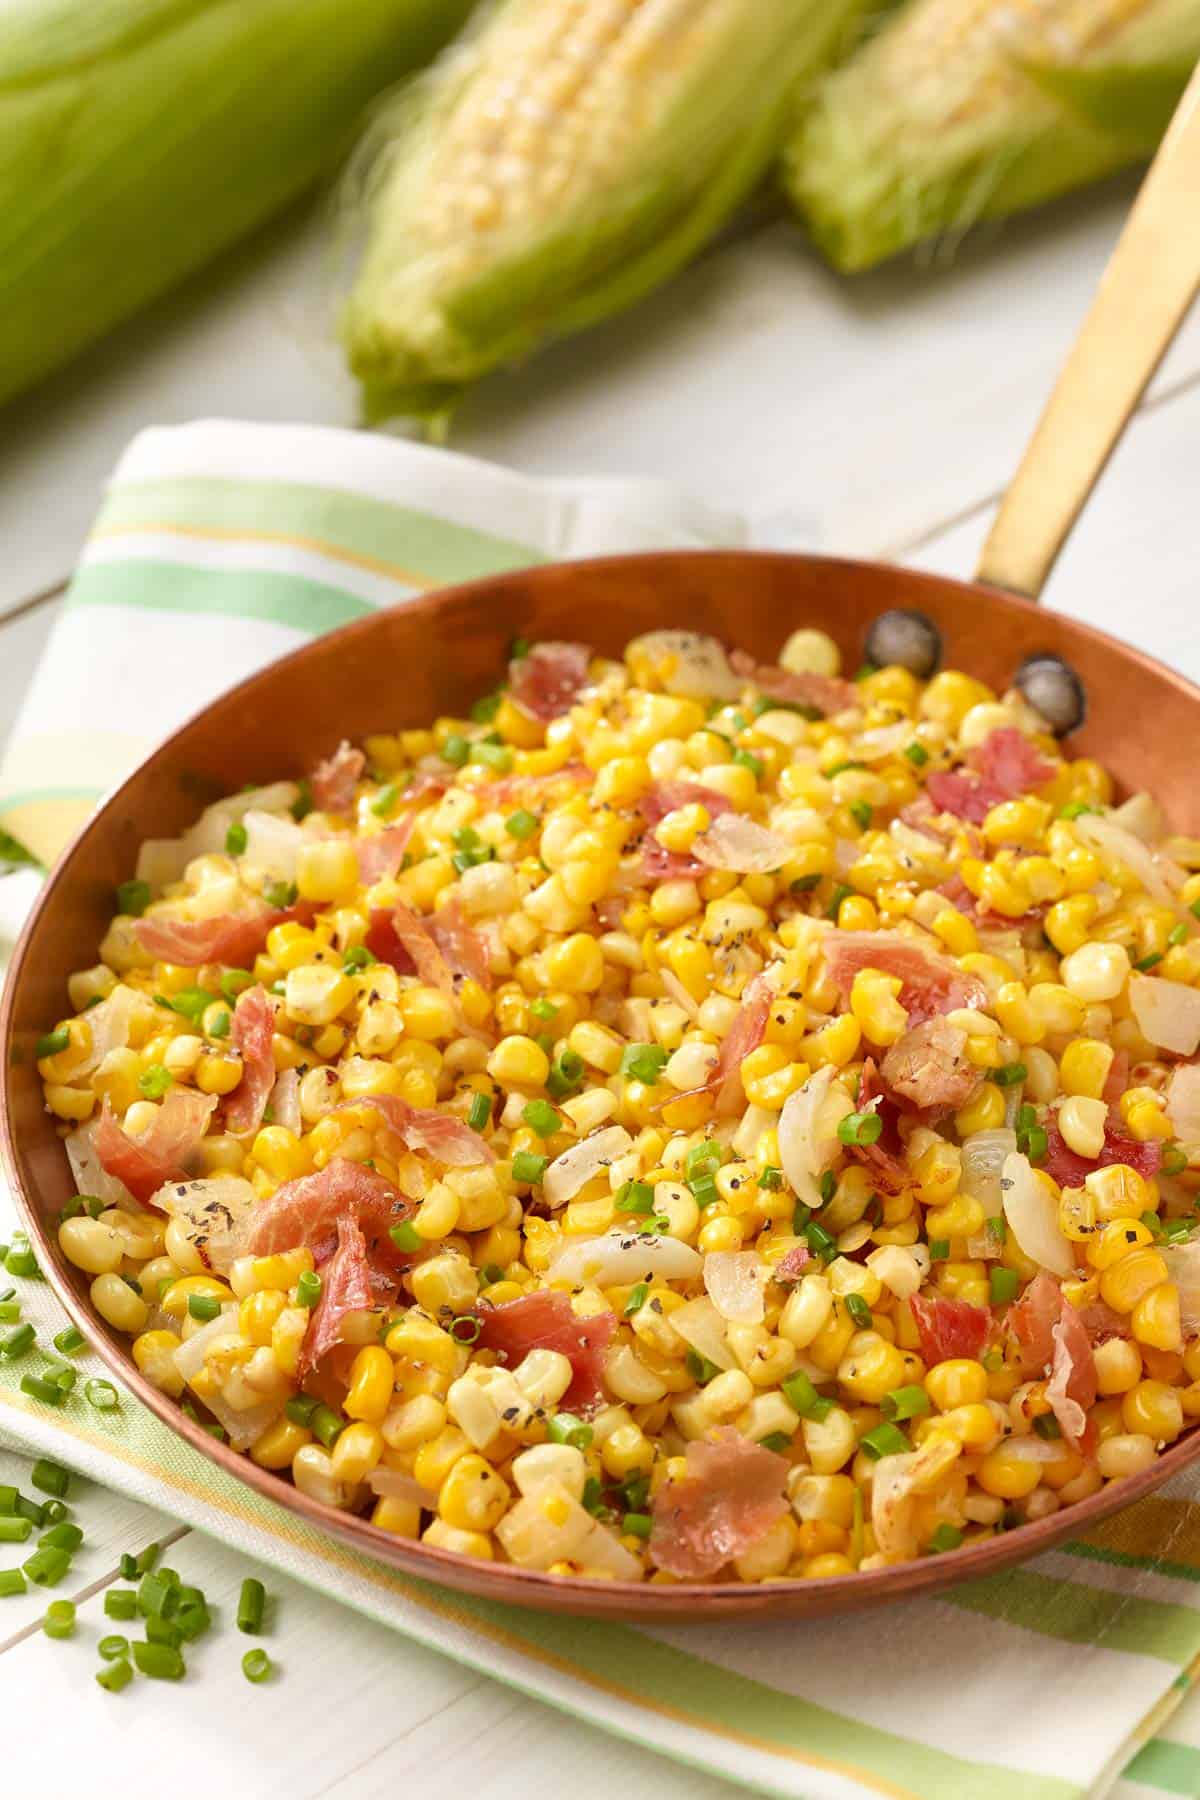 Copper skillet filled with Corn and Prosciutto Salad